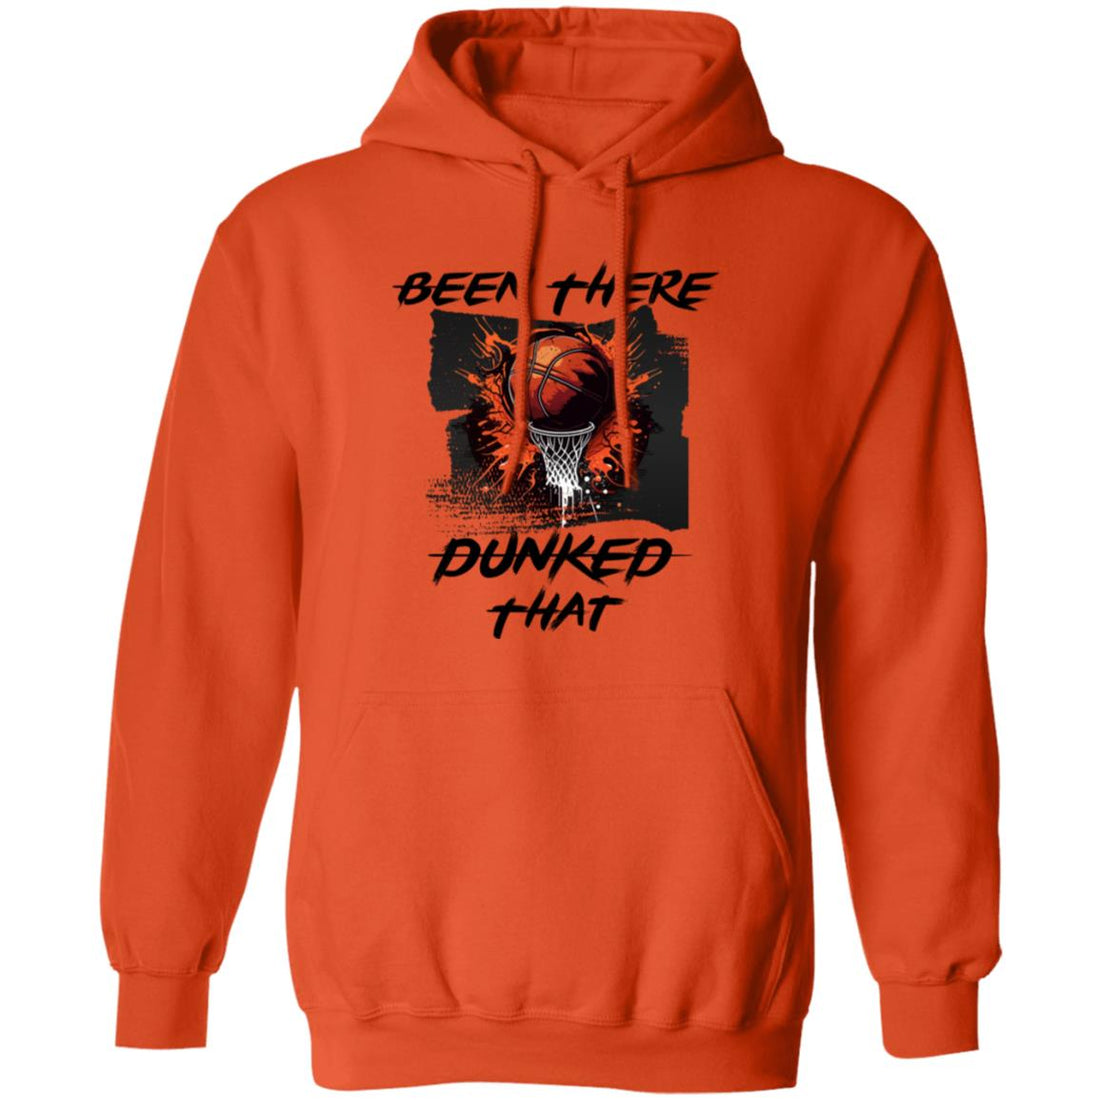 Been There Dunked That Pullover Hoodie - Sweatshirts - Positively Sassy - Been There Dunked That Pullover Hoodie